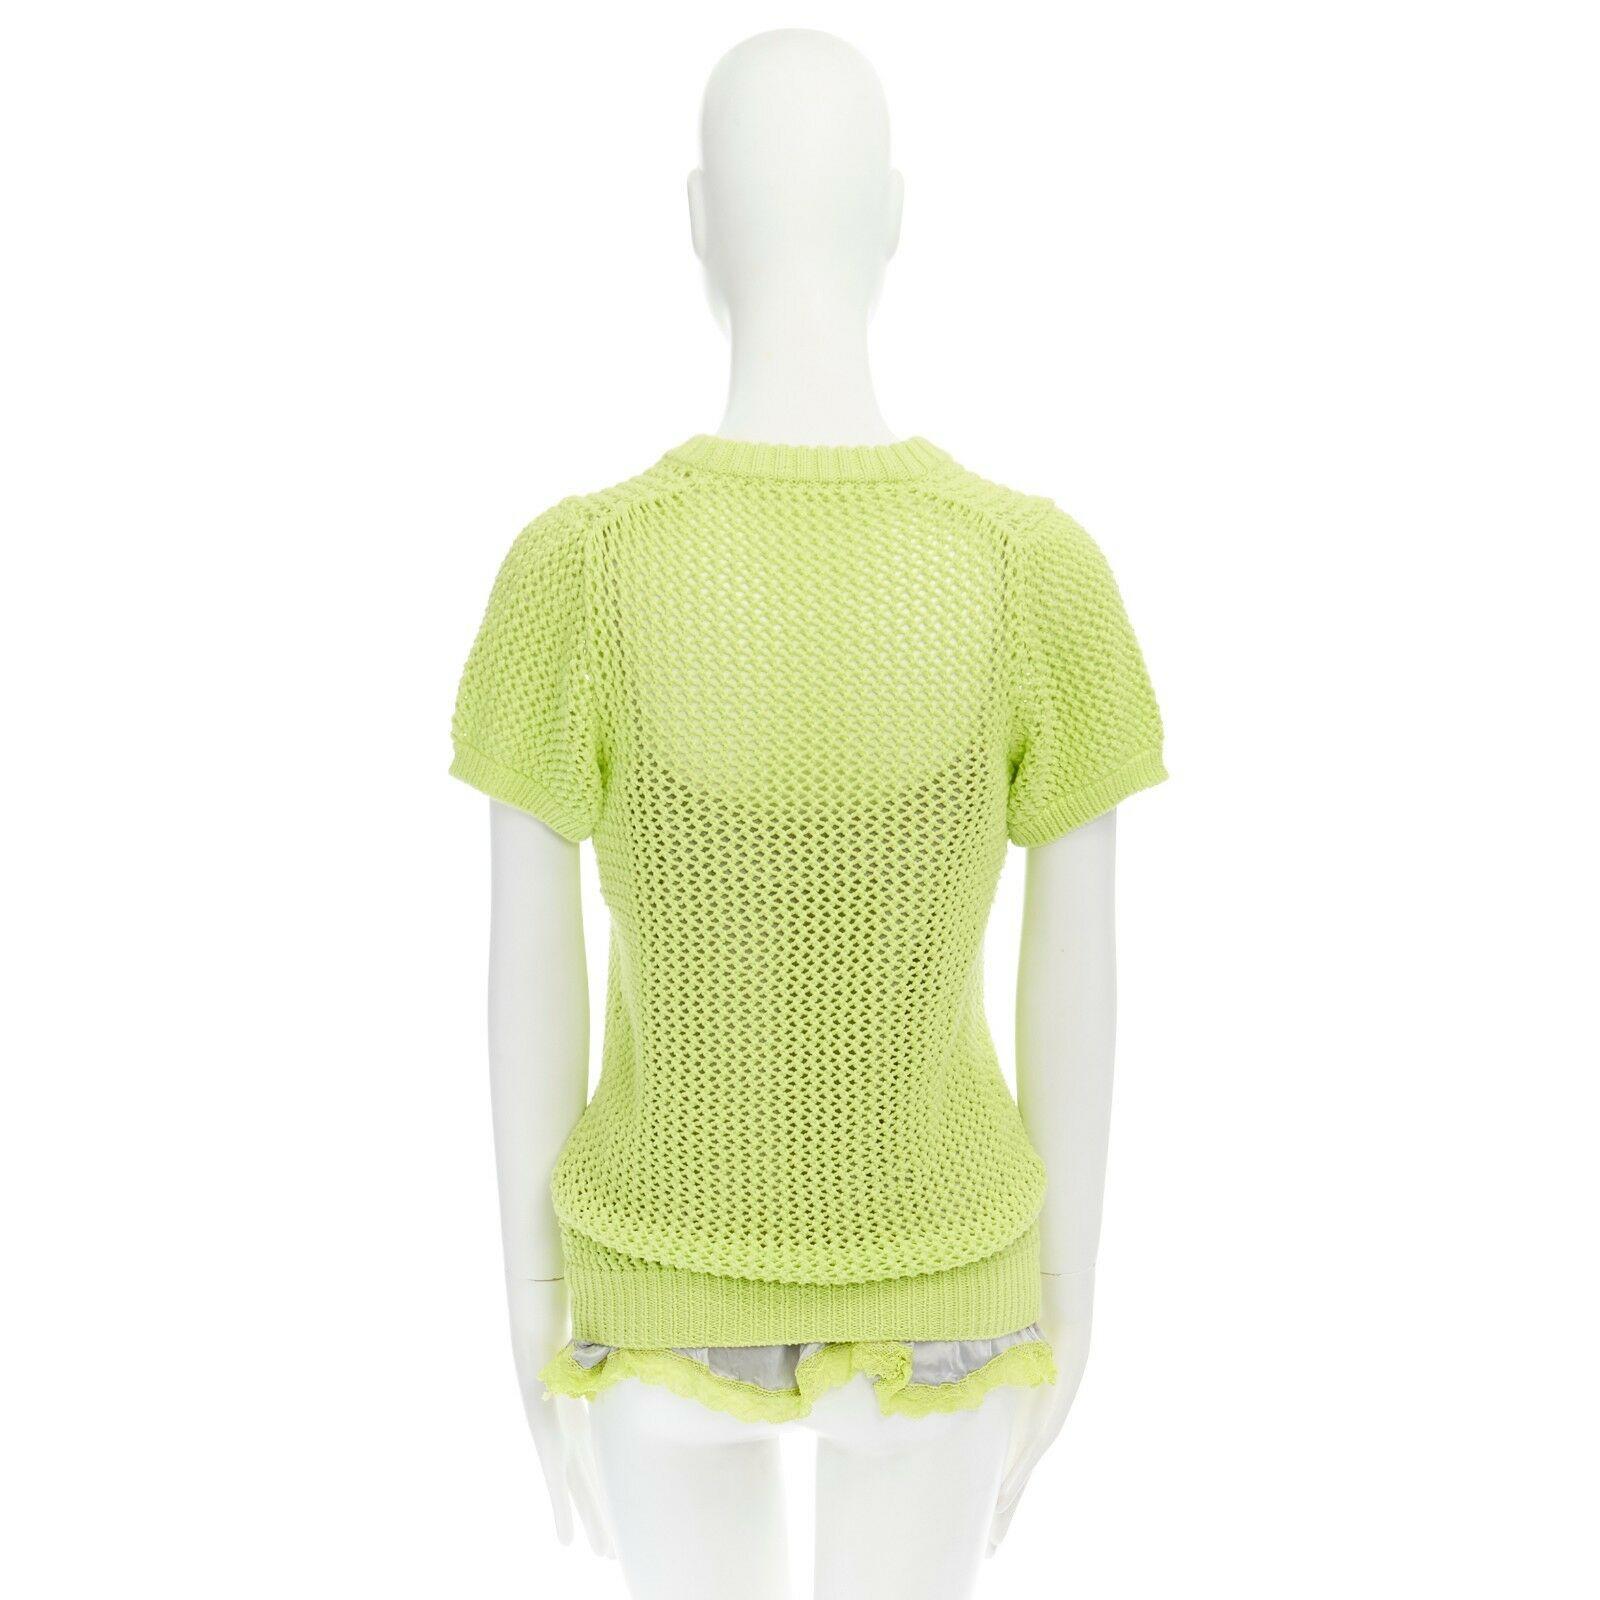 Women's SACAI LUCK neon yellow grey lace trimmed camisole crochet knit sweater top JP3 L